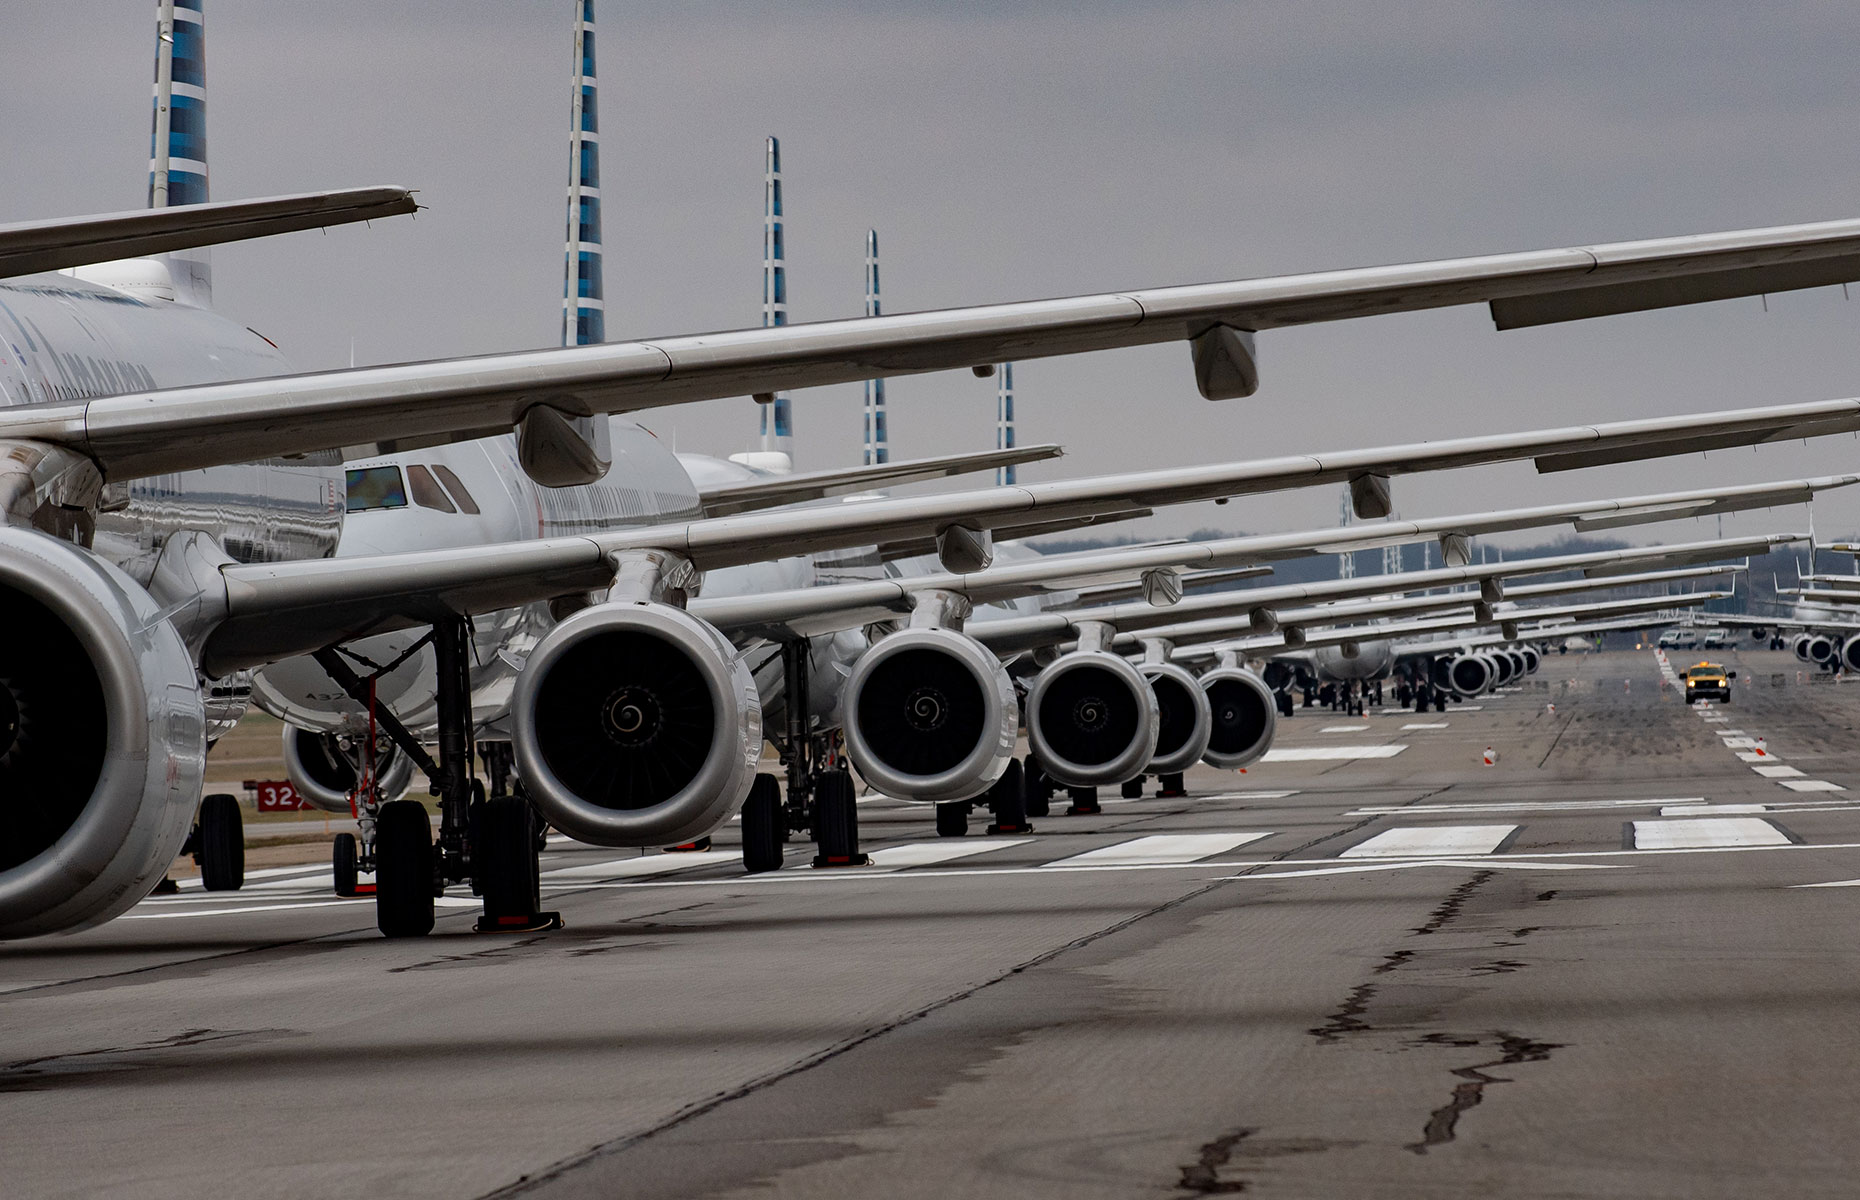 American Airlines planes parked at Pittsburgh airport, PA. (Image: Jeff Swensen/Getty Images)